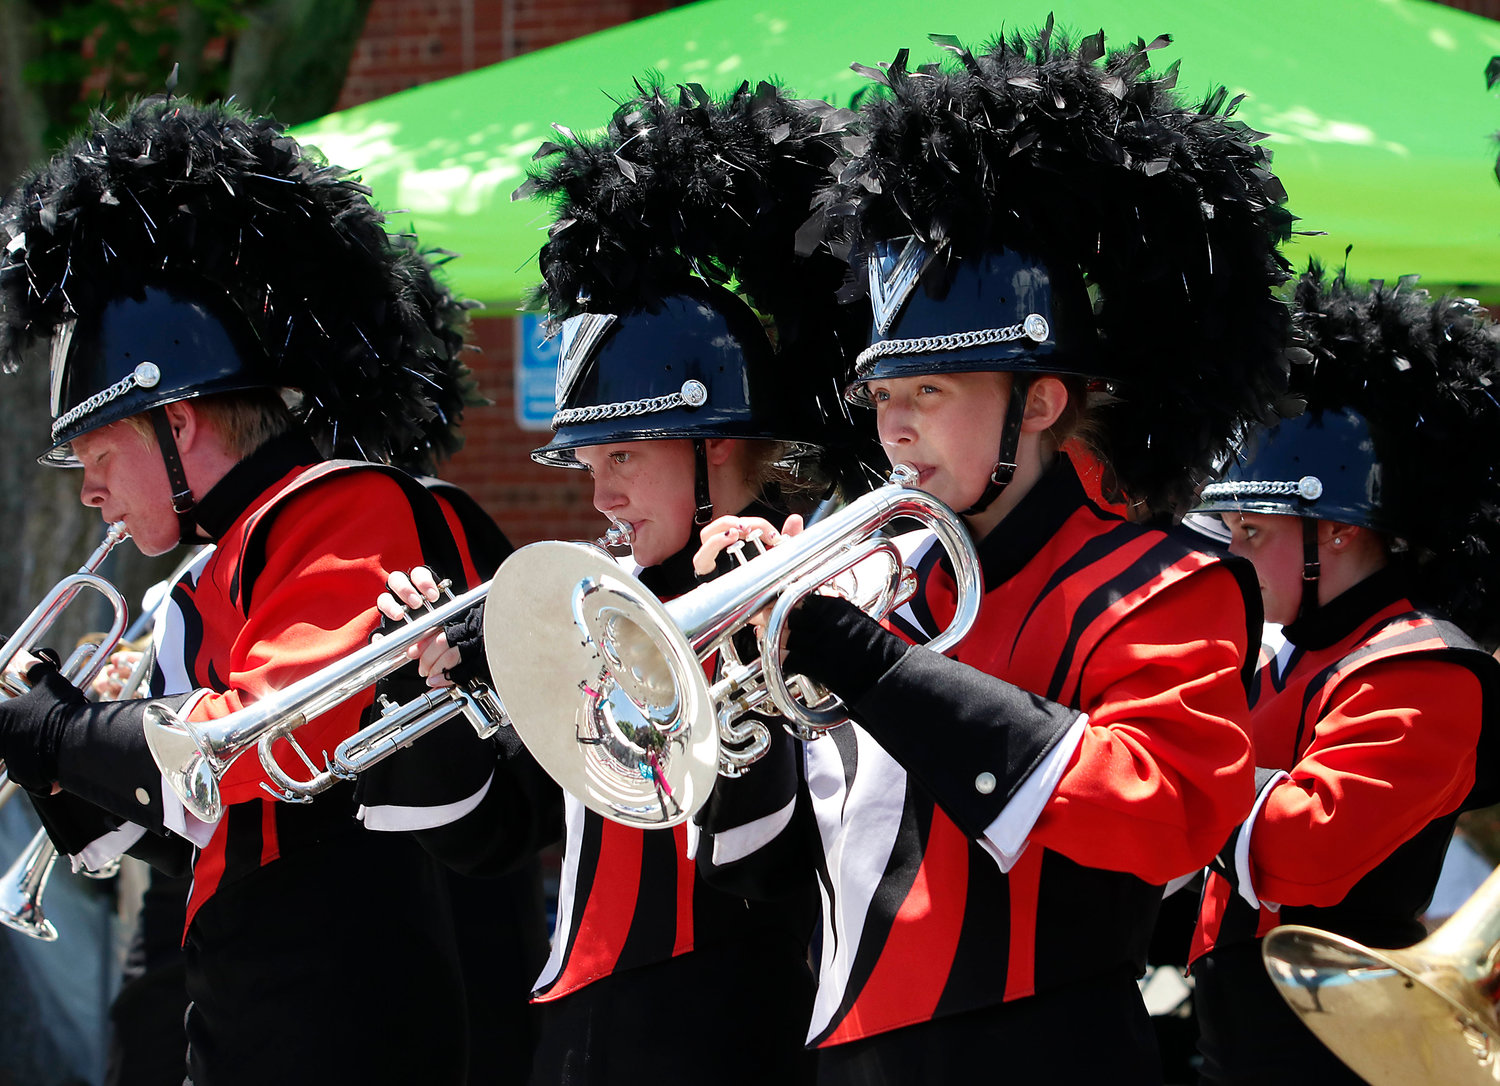 Members of the Tiger Band perform in front of the Chief Marshal's tent.